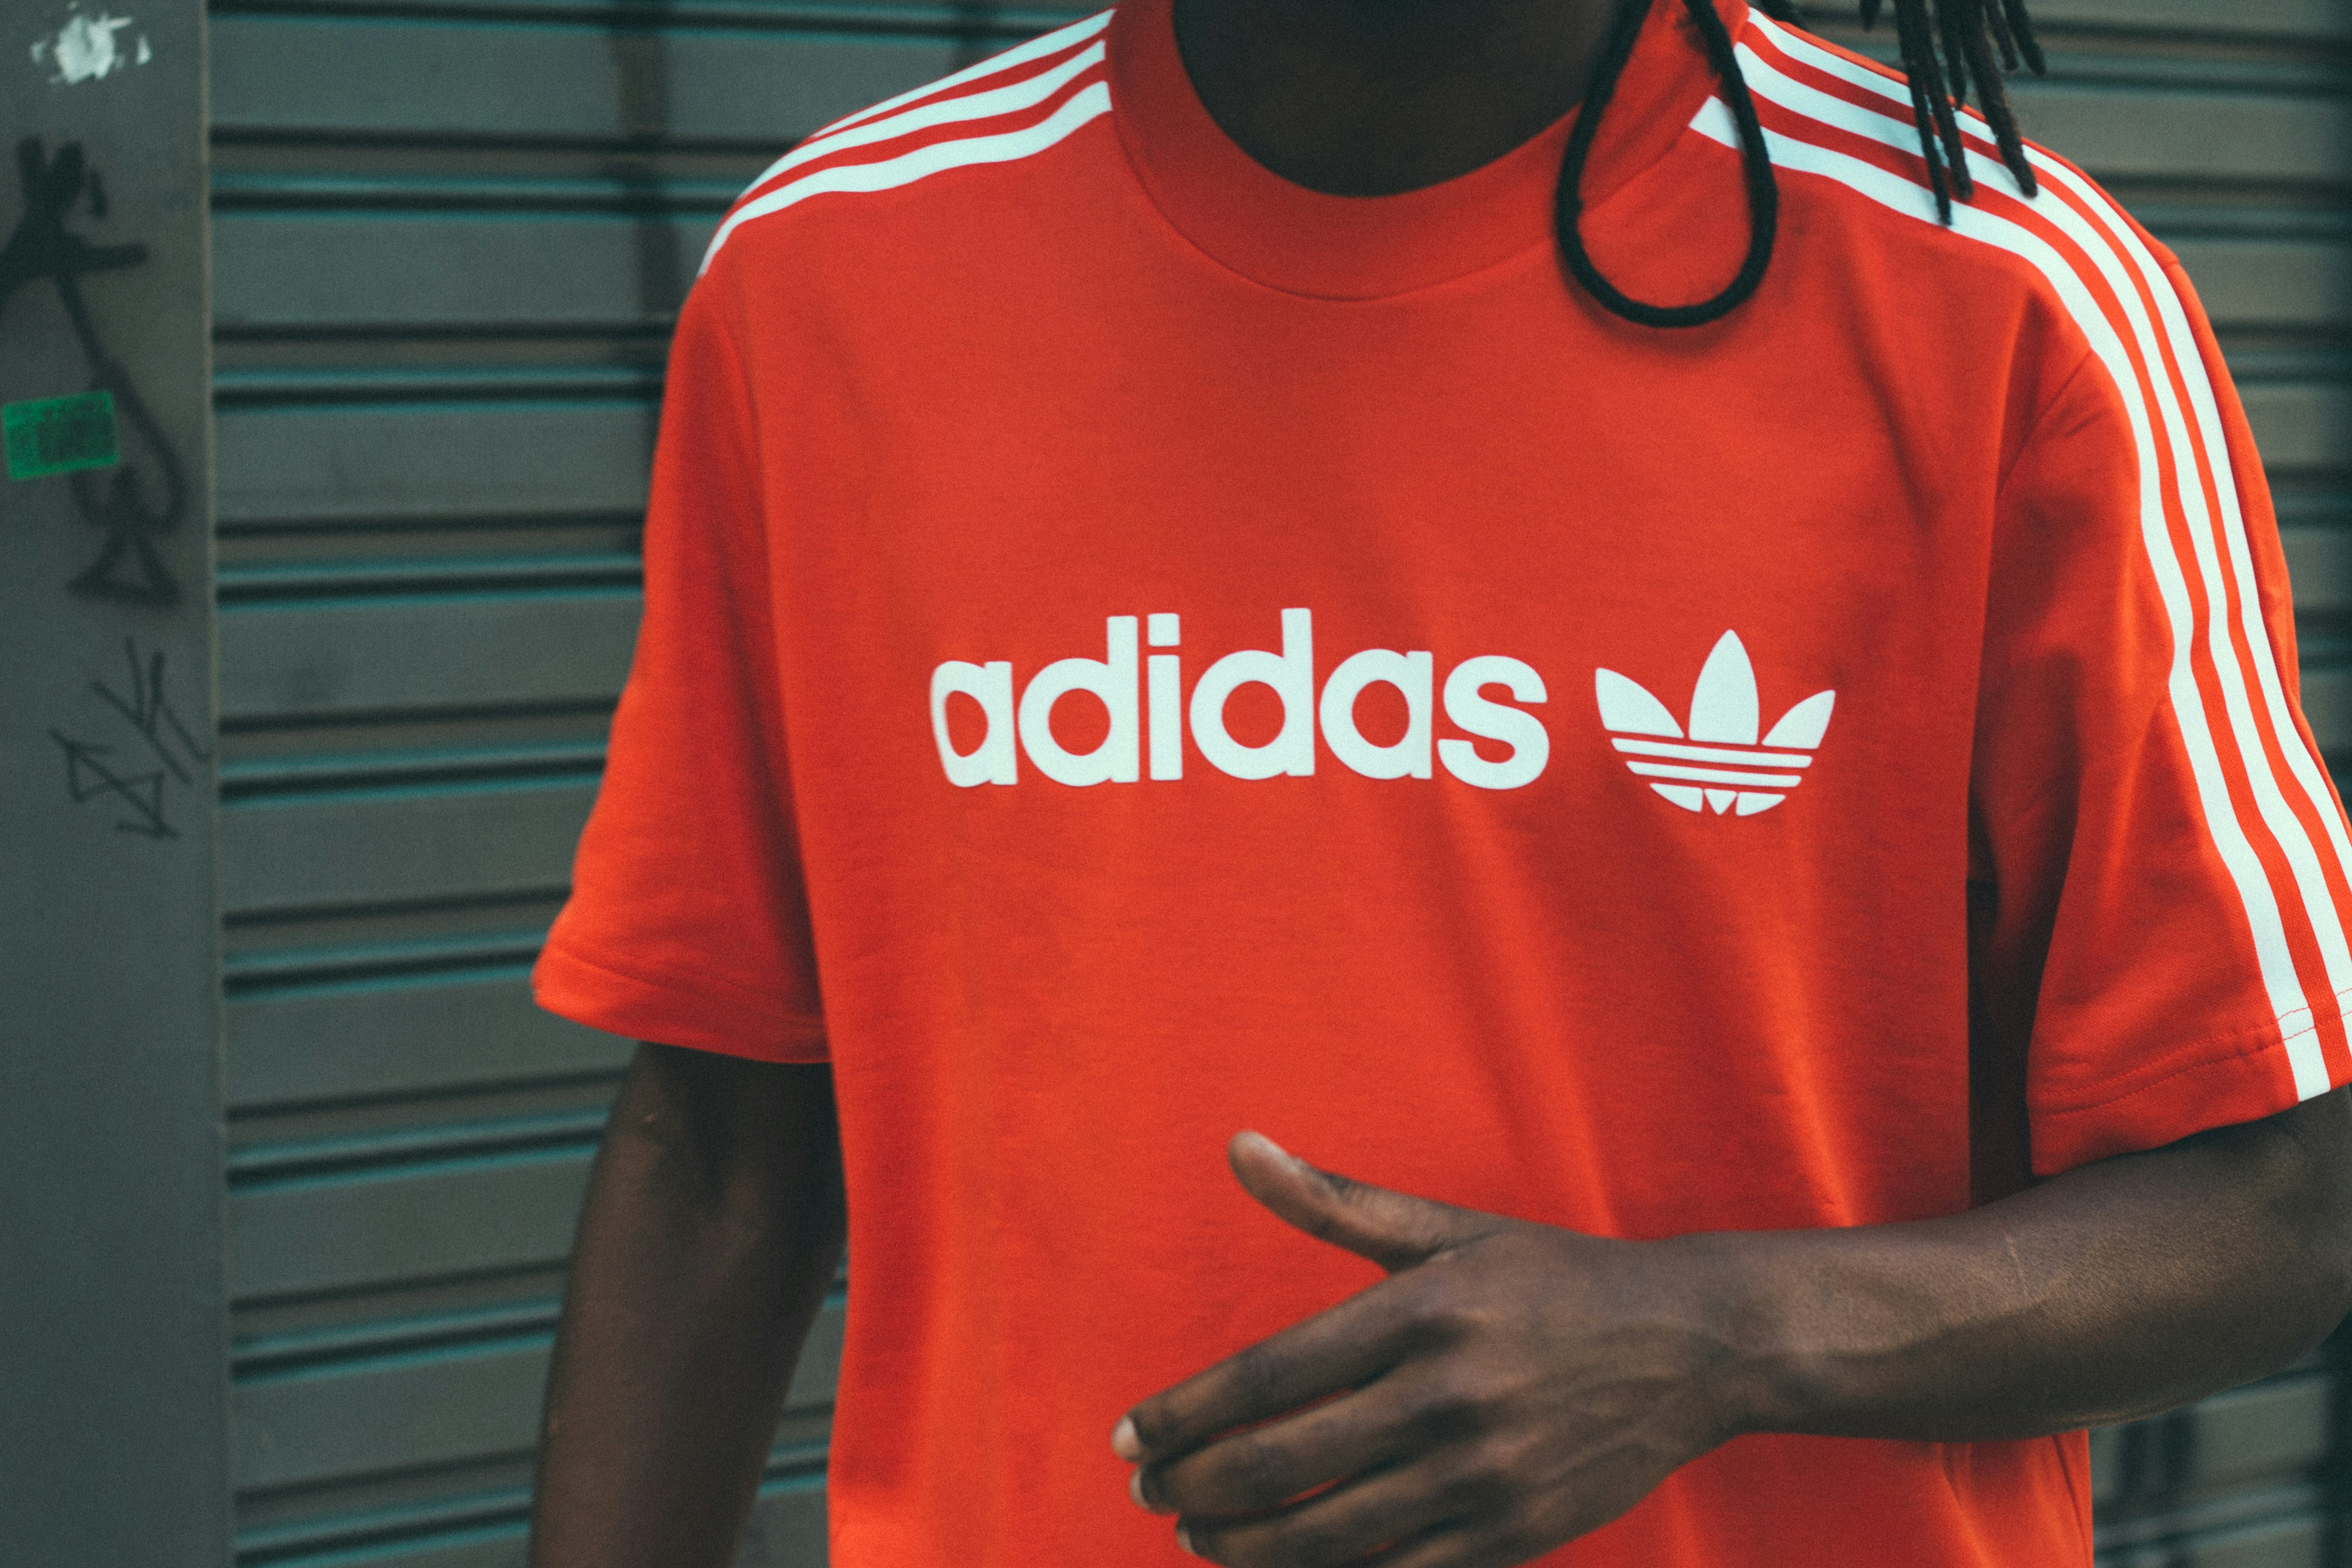 adidas t shirt red and white